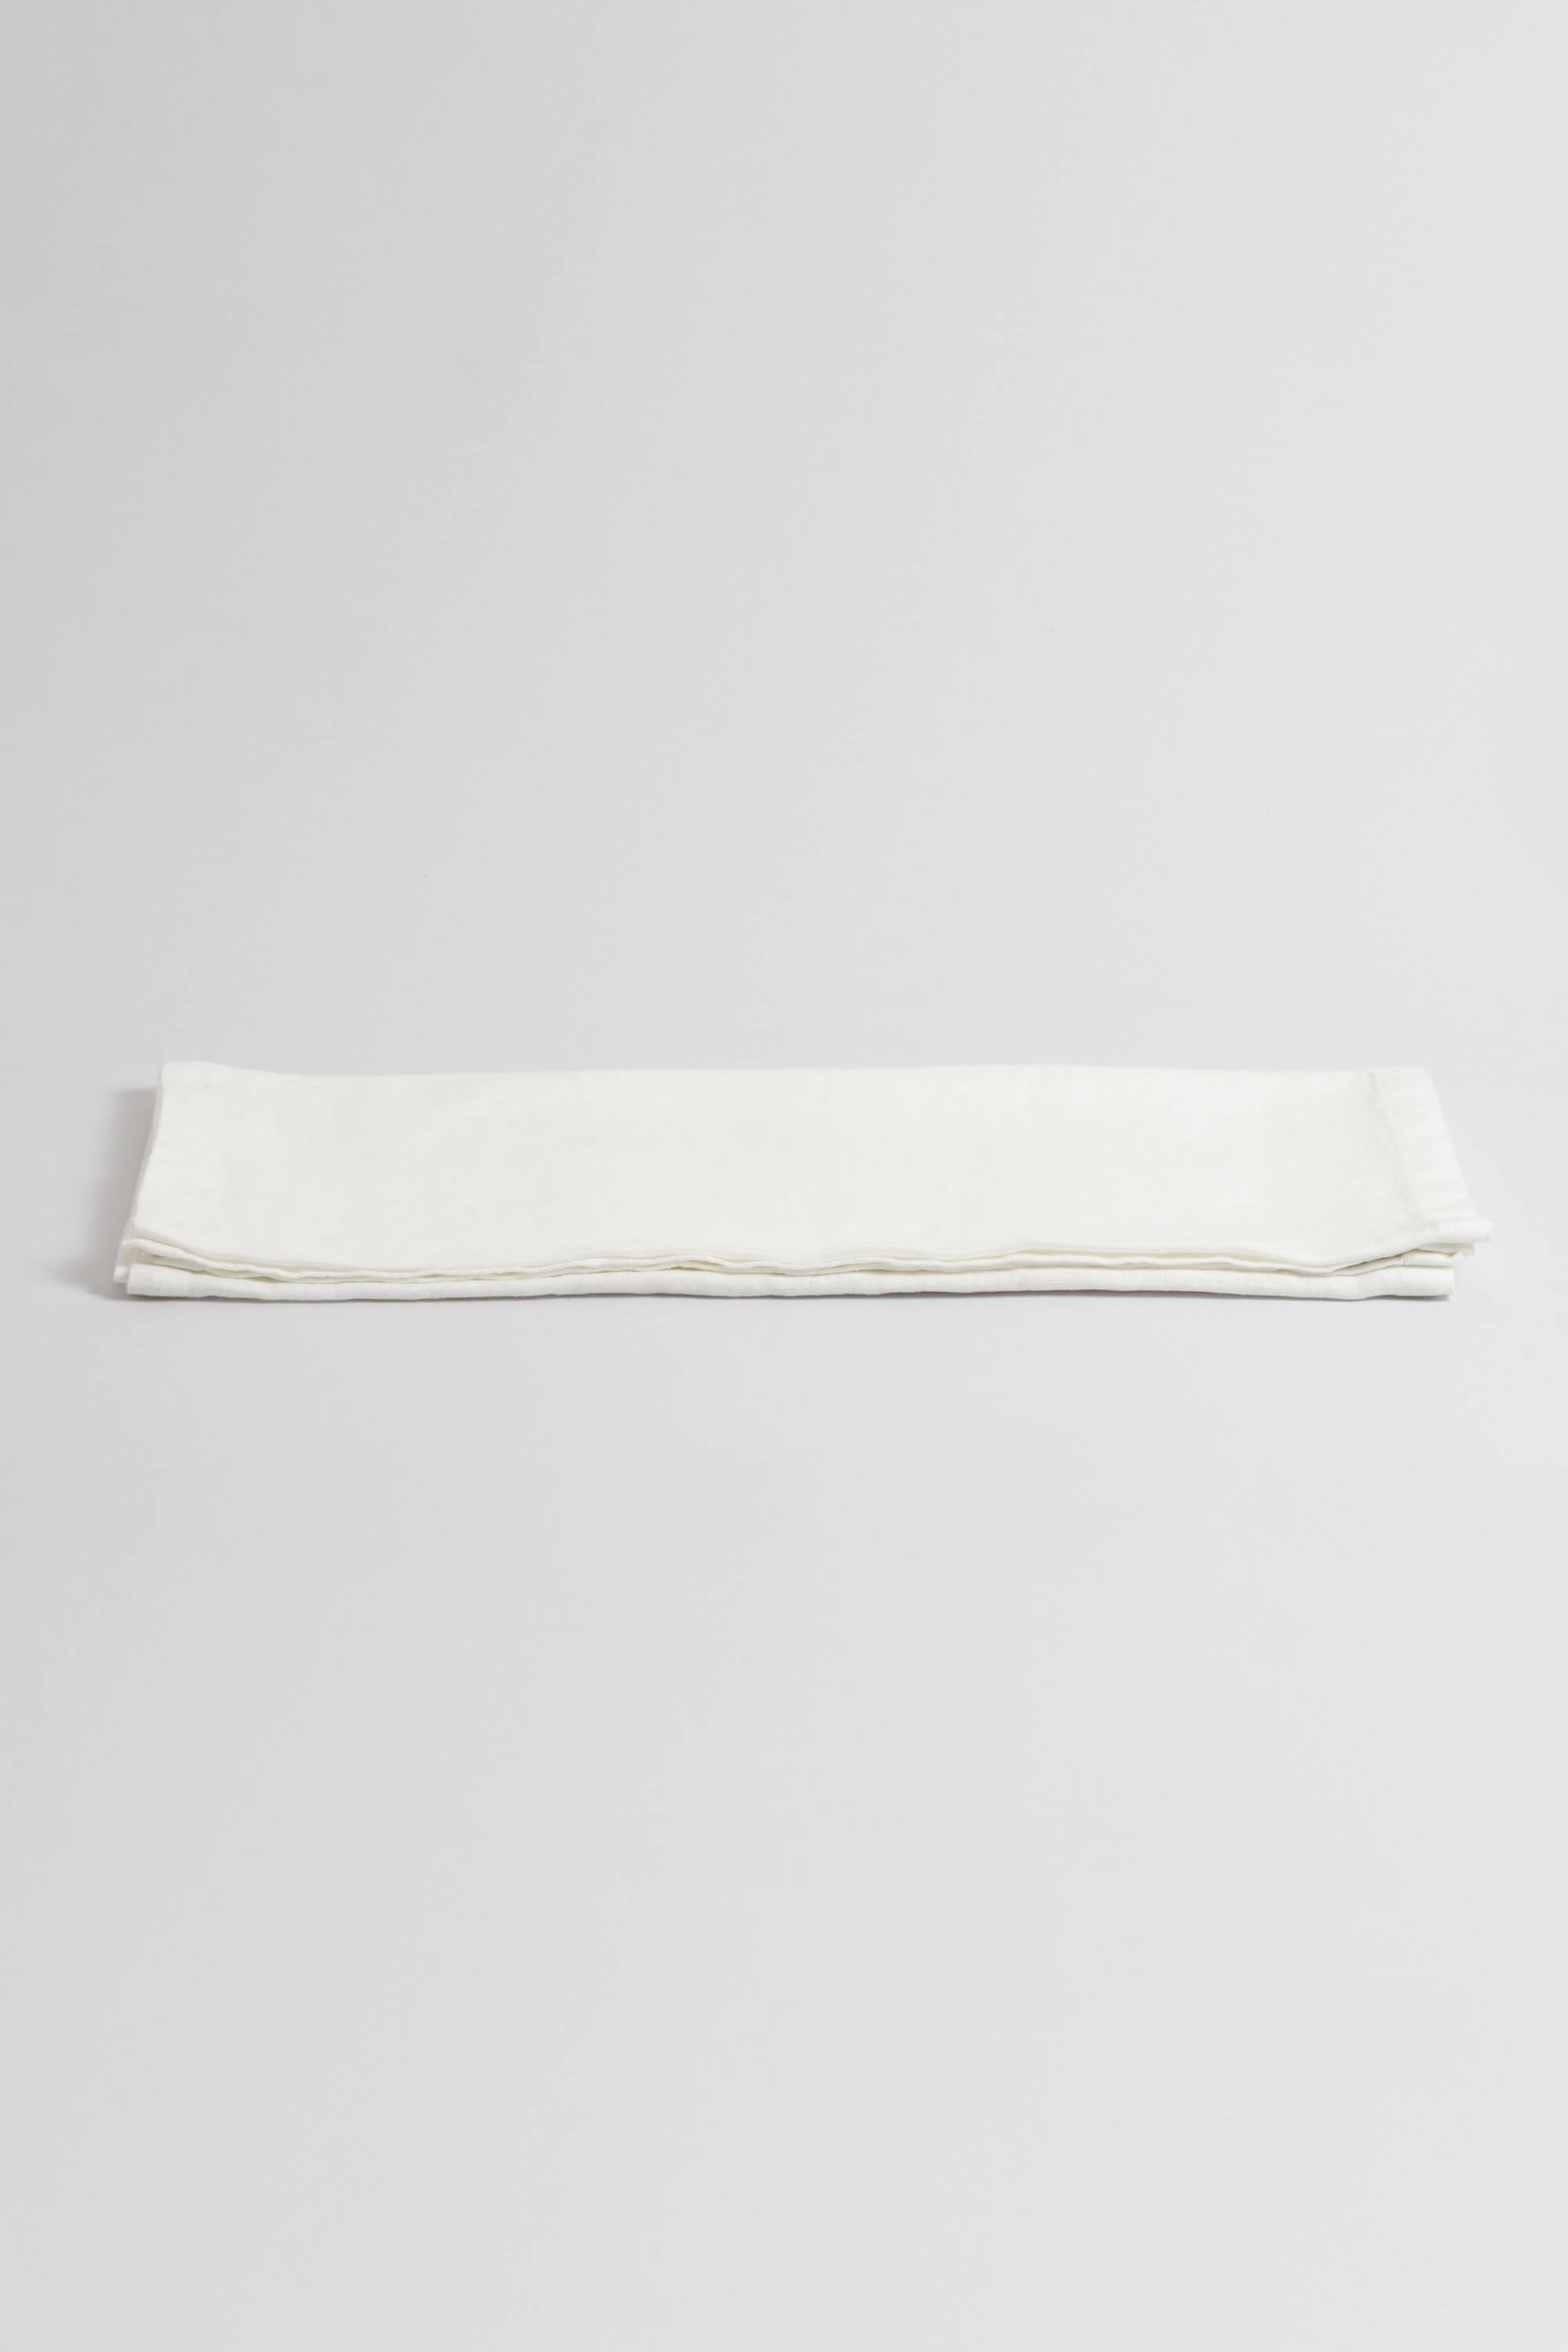 Table Runner | White | Linen/Cotton | by O Cactuu - Lifestory - O Cactuu